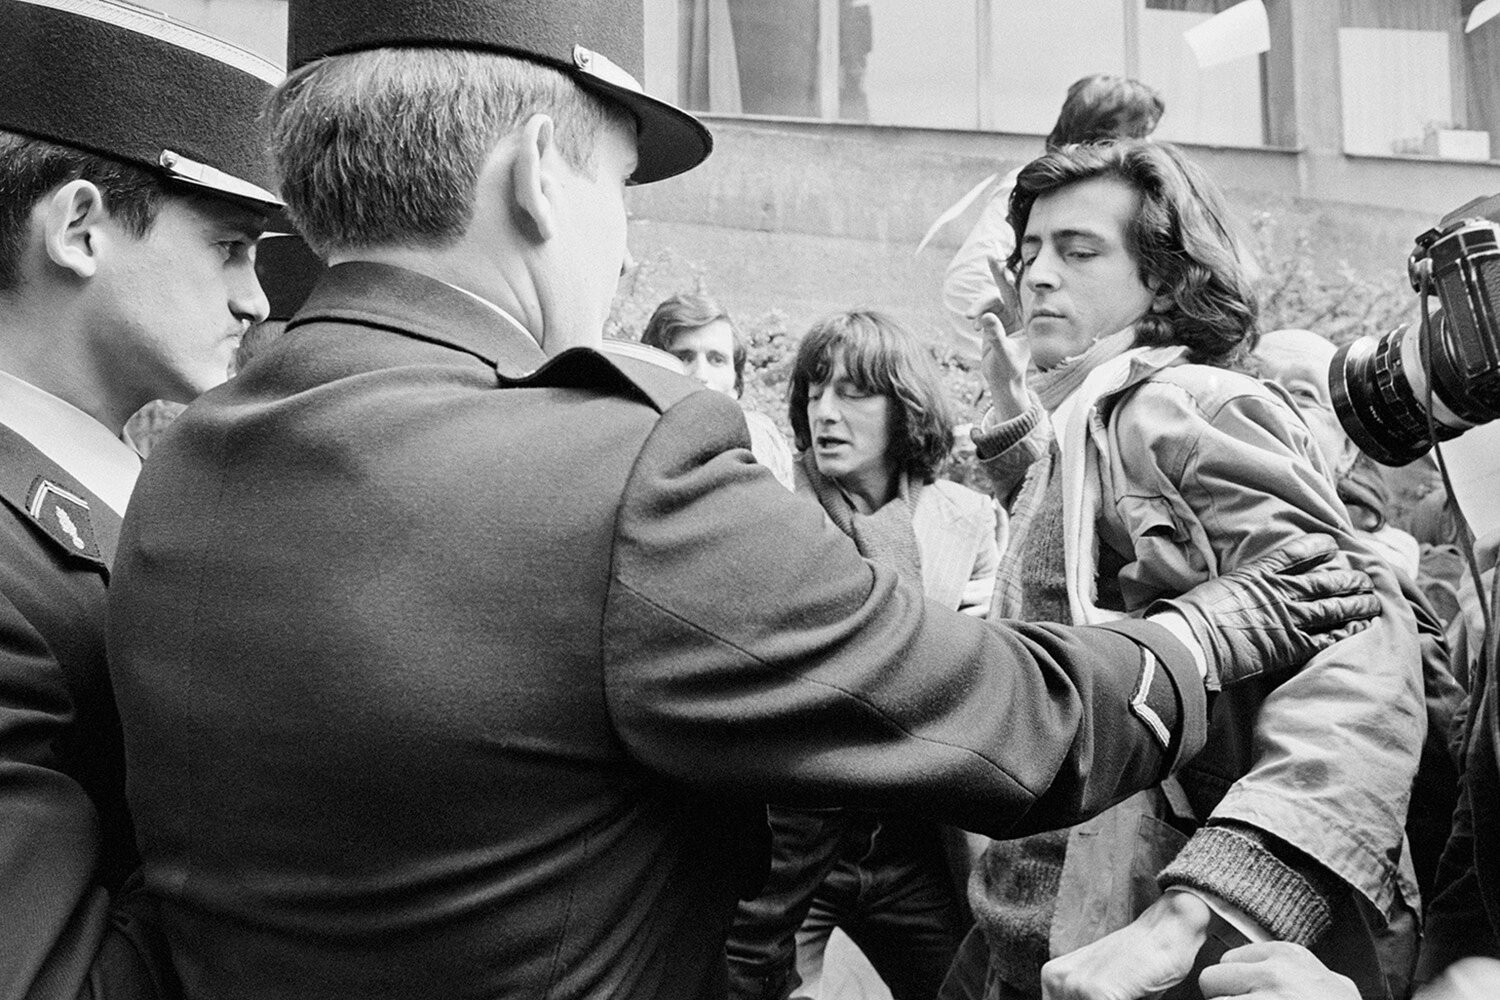 Lévy takes part in a demonstration in Paris on May 15, 1978, in support of the nuclear physicist and human rights activist Yuri Orlov, who was imprisoned in a Siberian gulag for political reasons from 1977 to 1986.